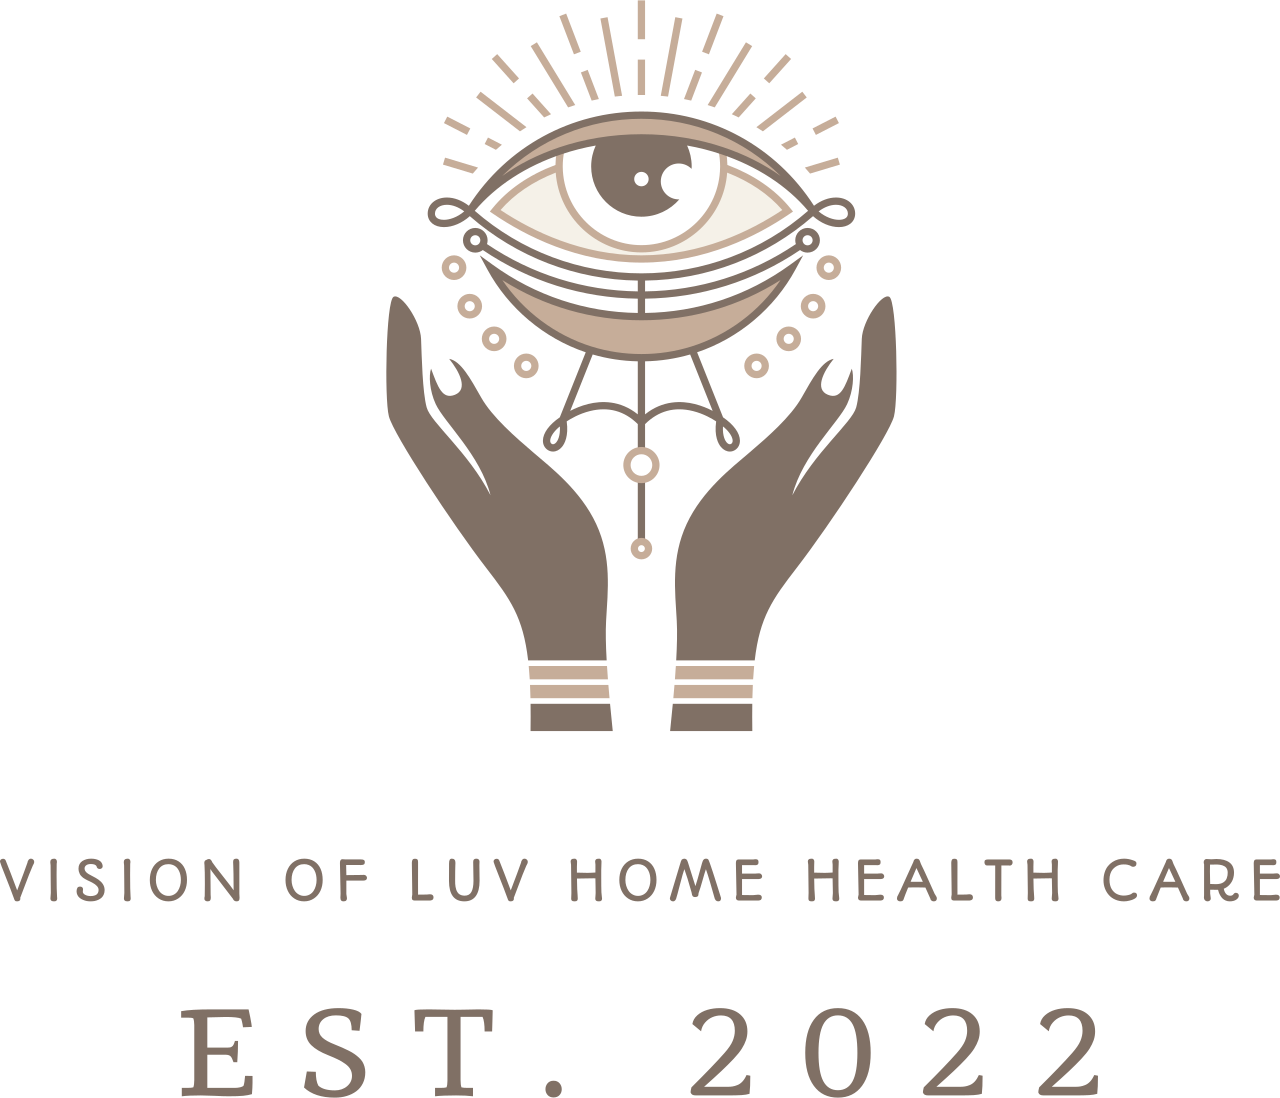 VISION OF LUV  HHC Home Health Care 's web page